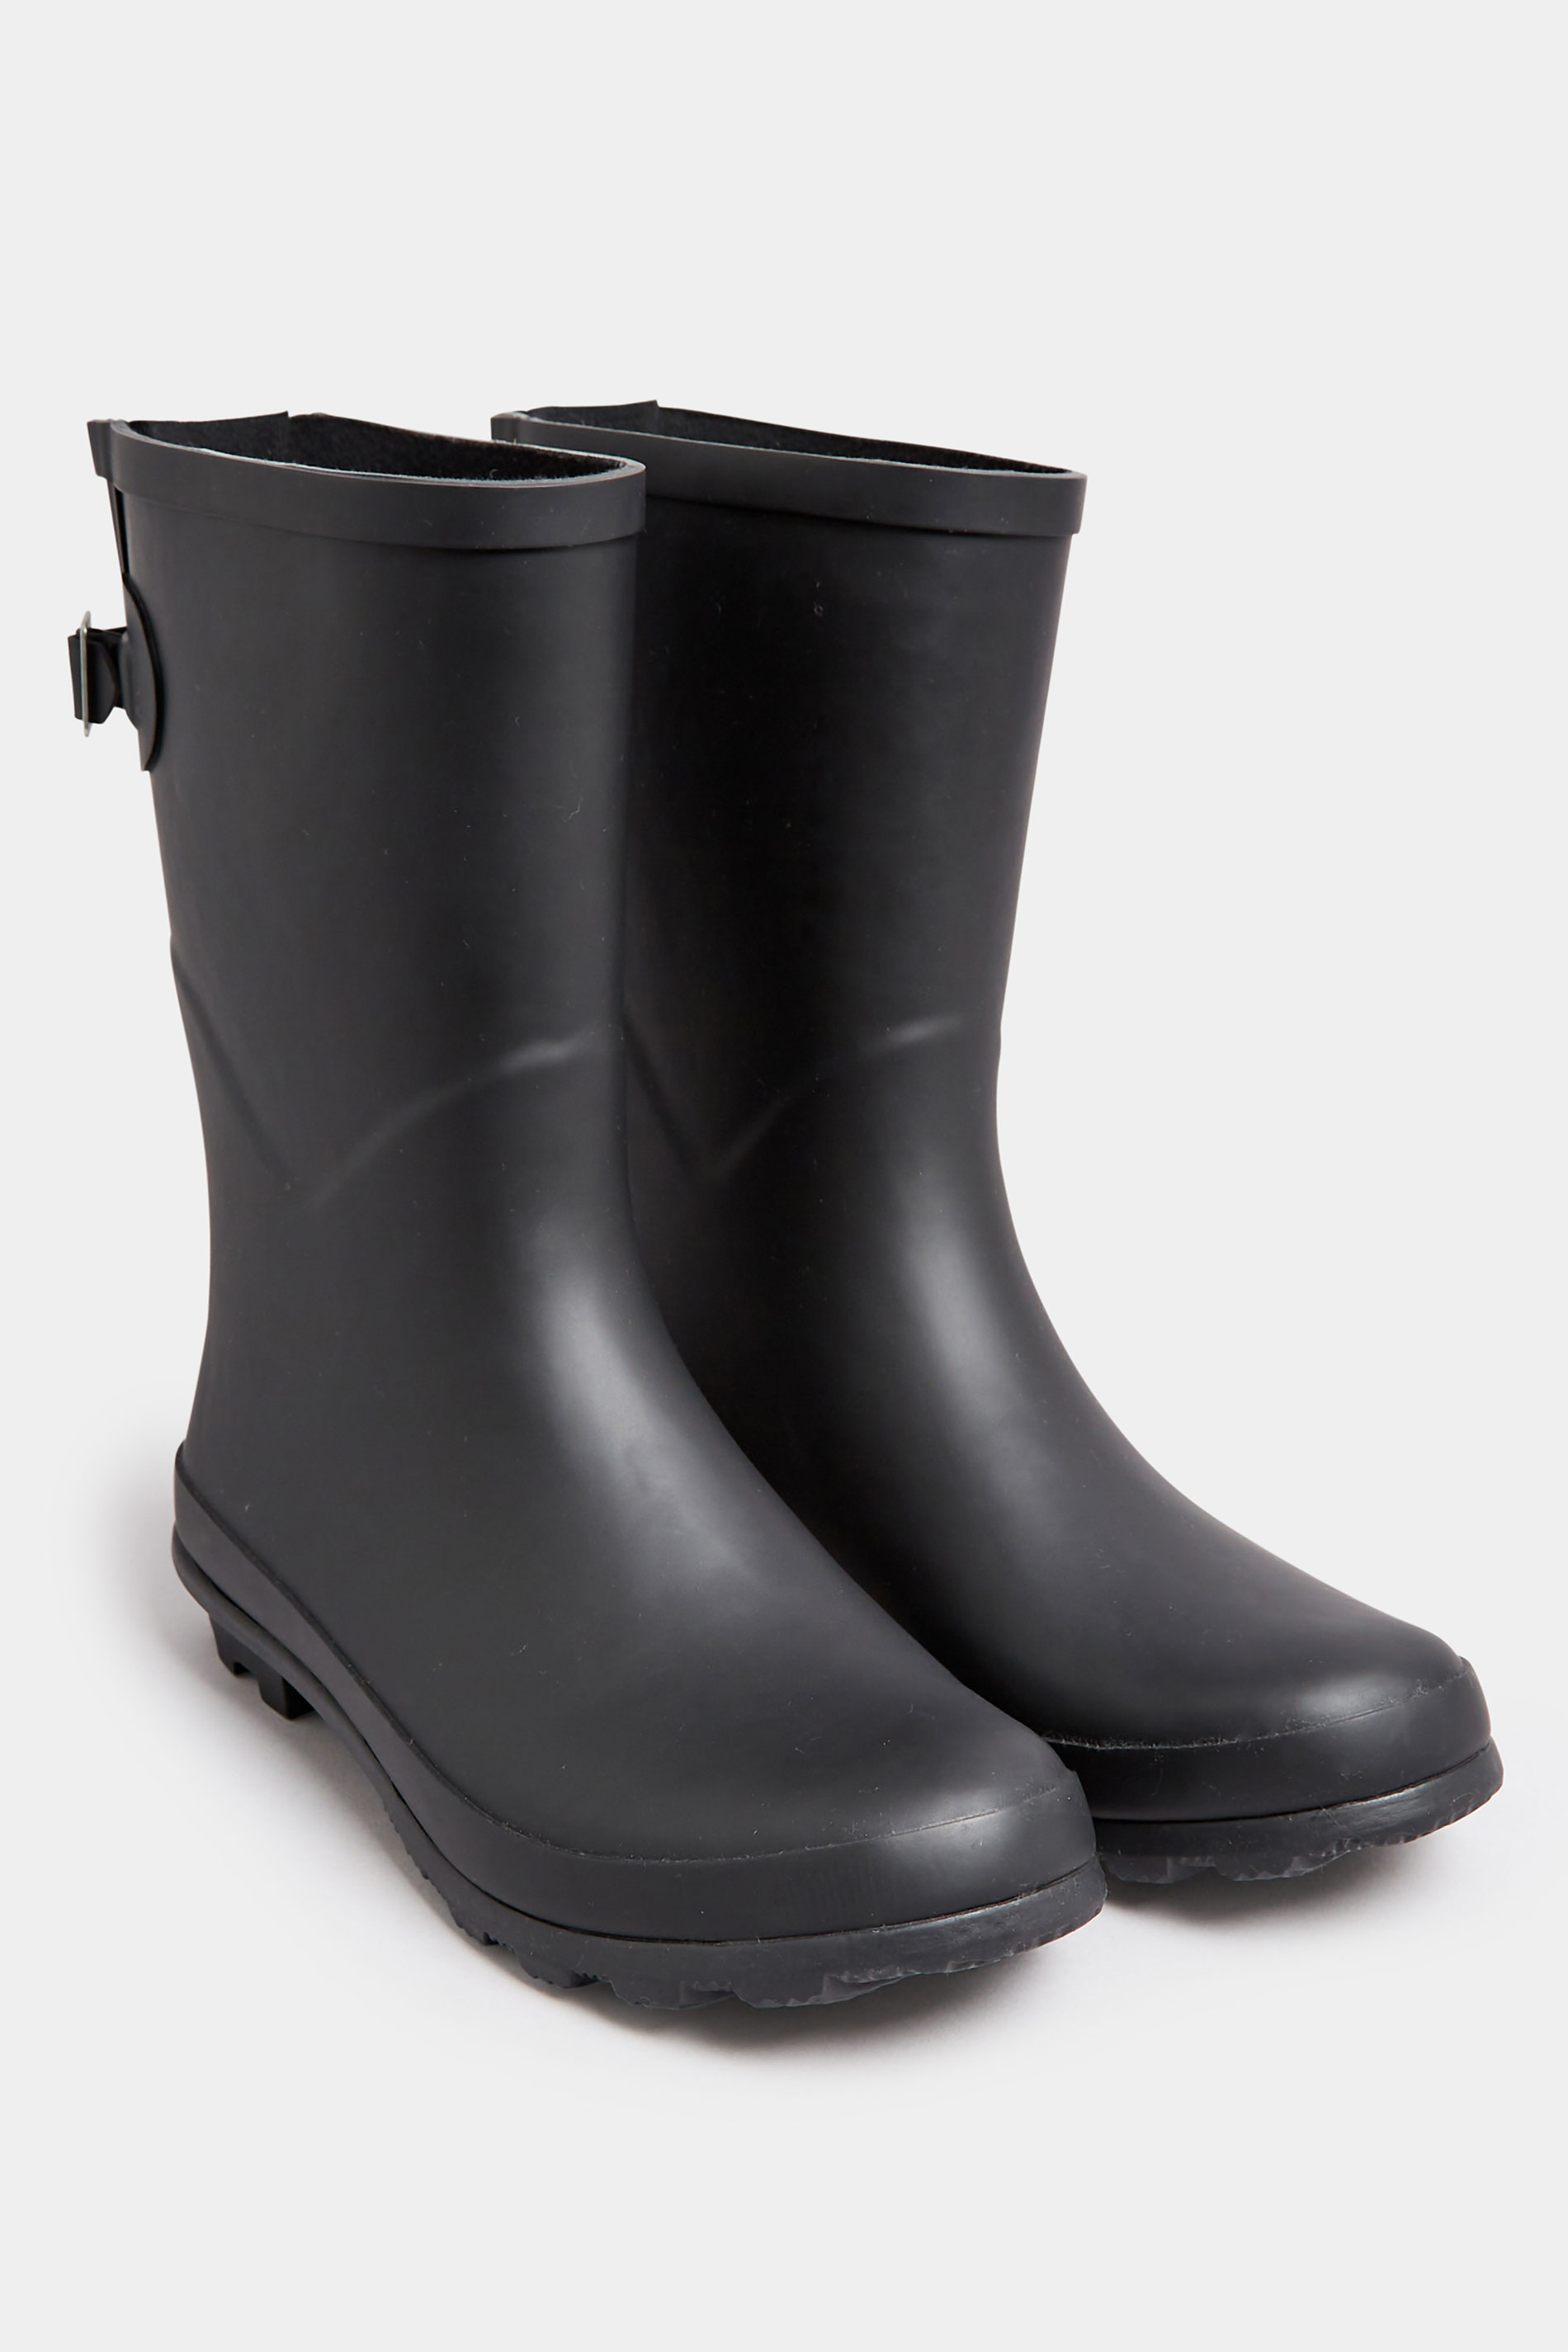 Black Mid Calf Wellies In Wide E Fit | Yours Clothing